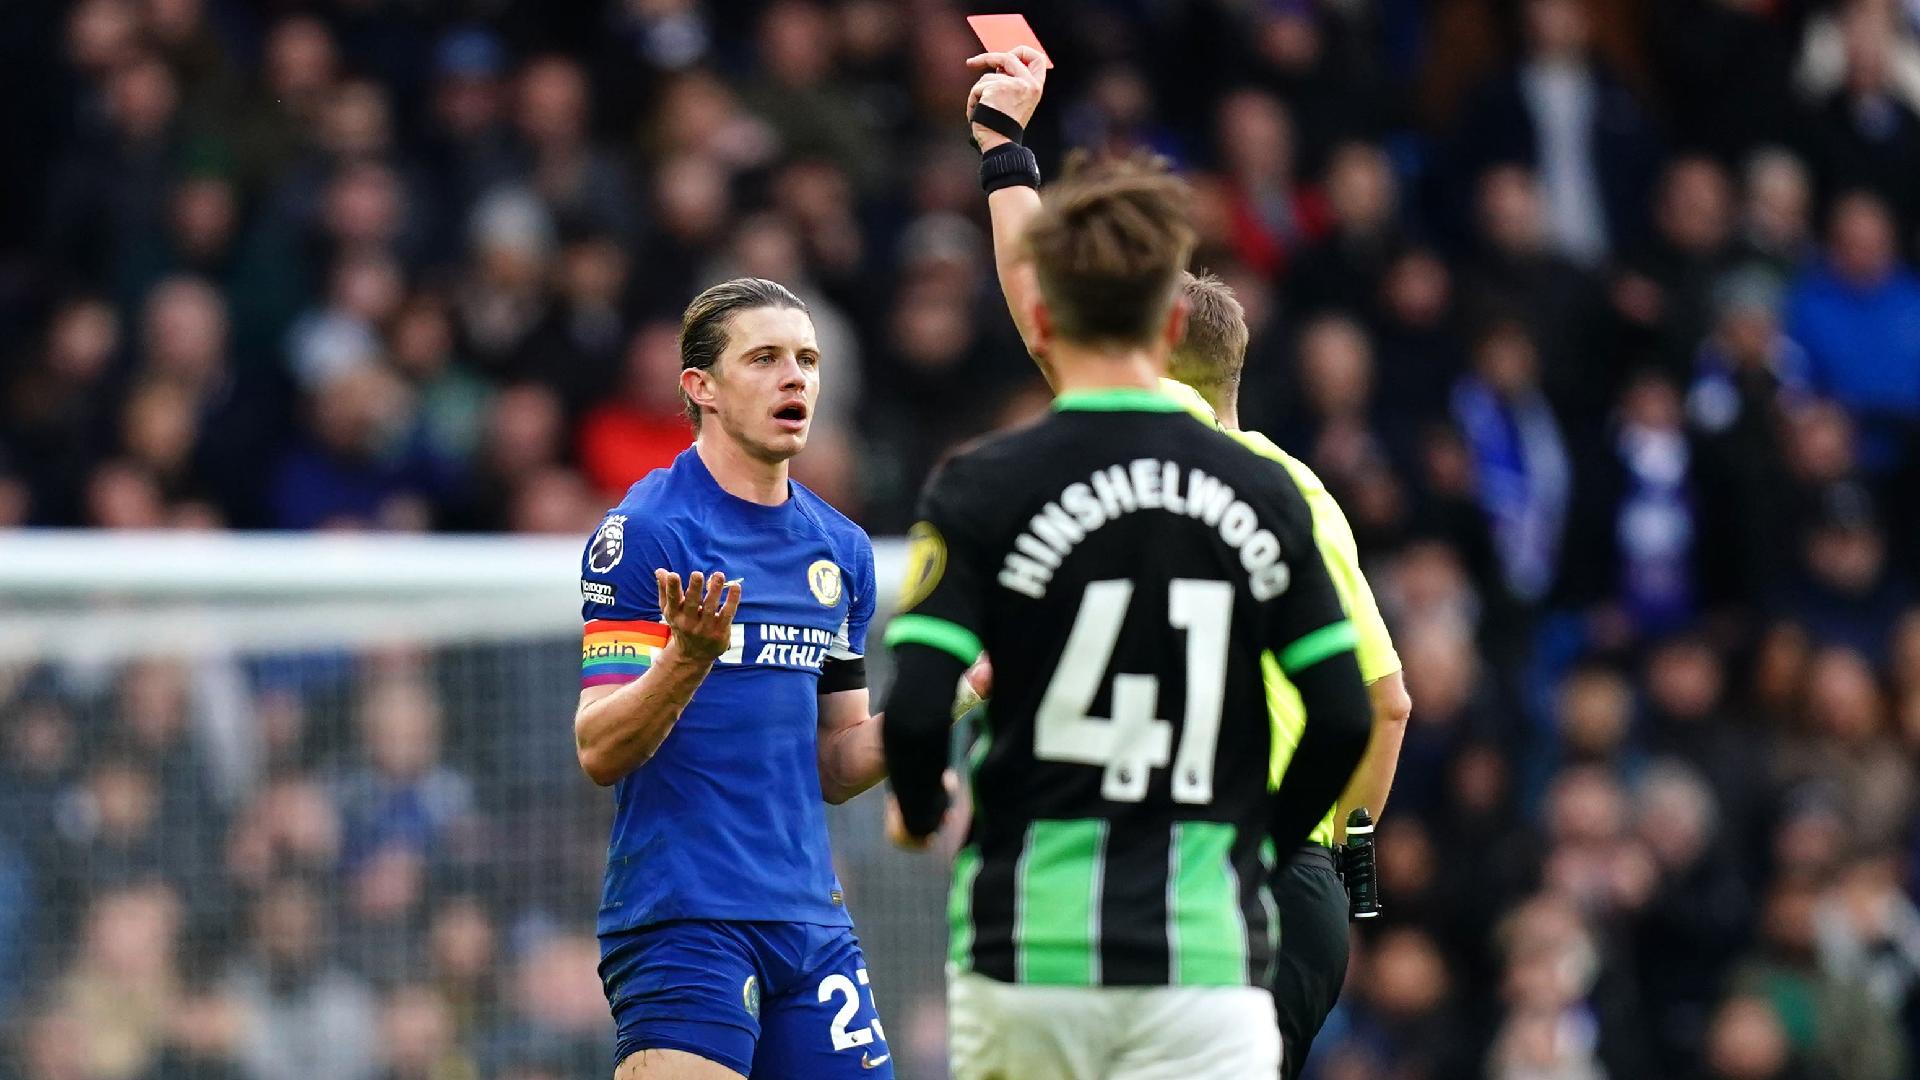 Sendings-off stacking up – Premier League on course for record red card haul